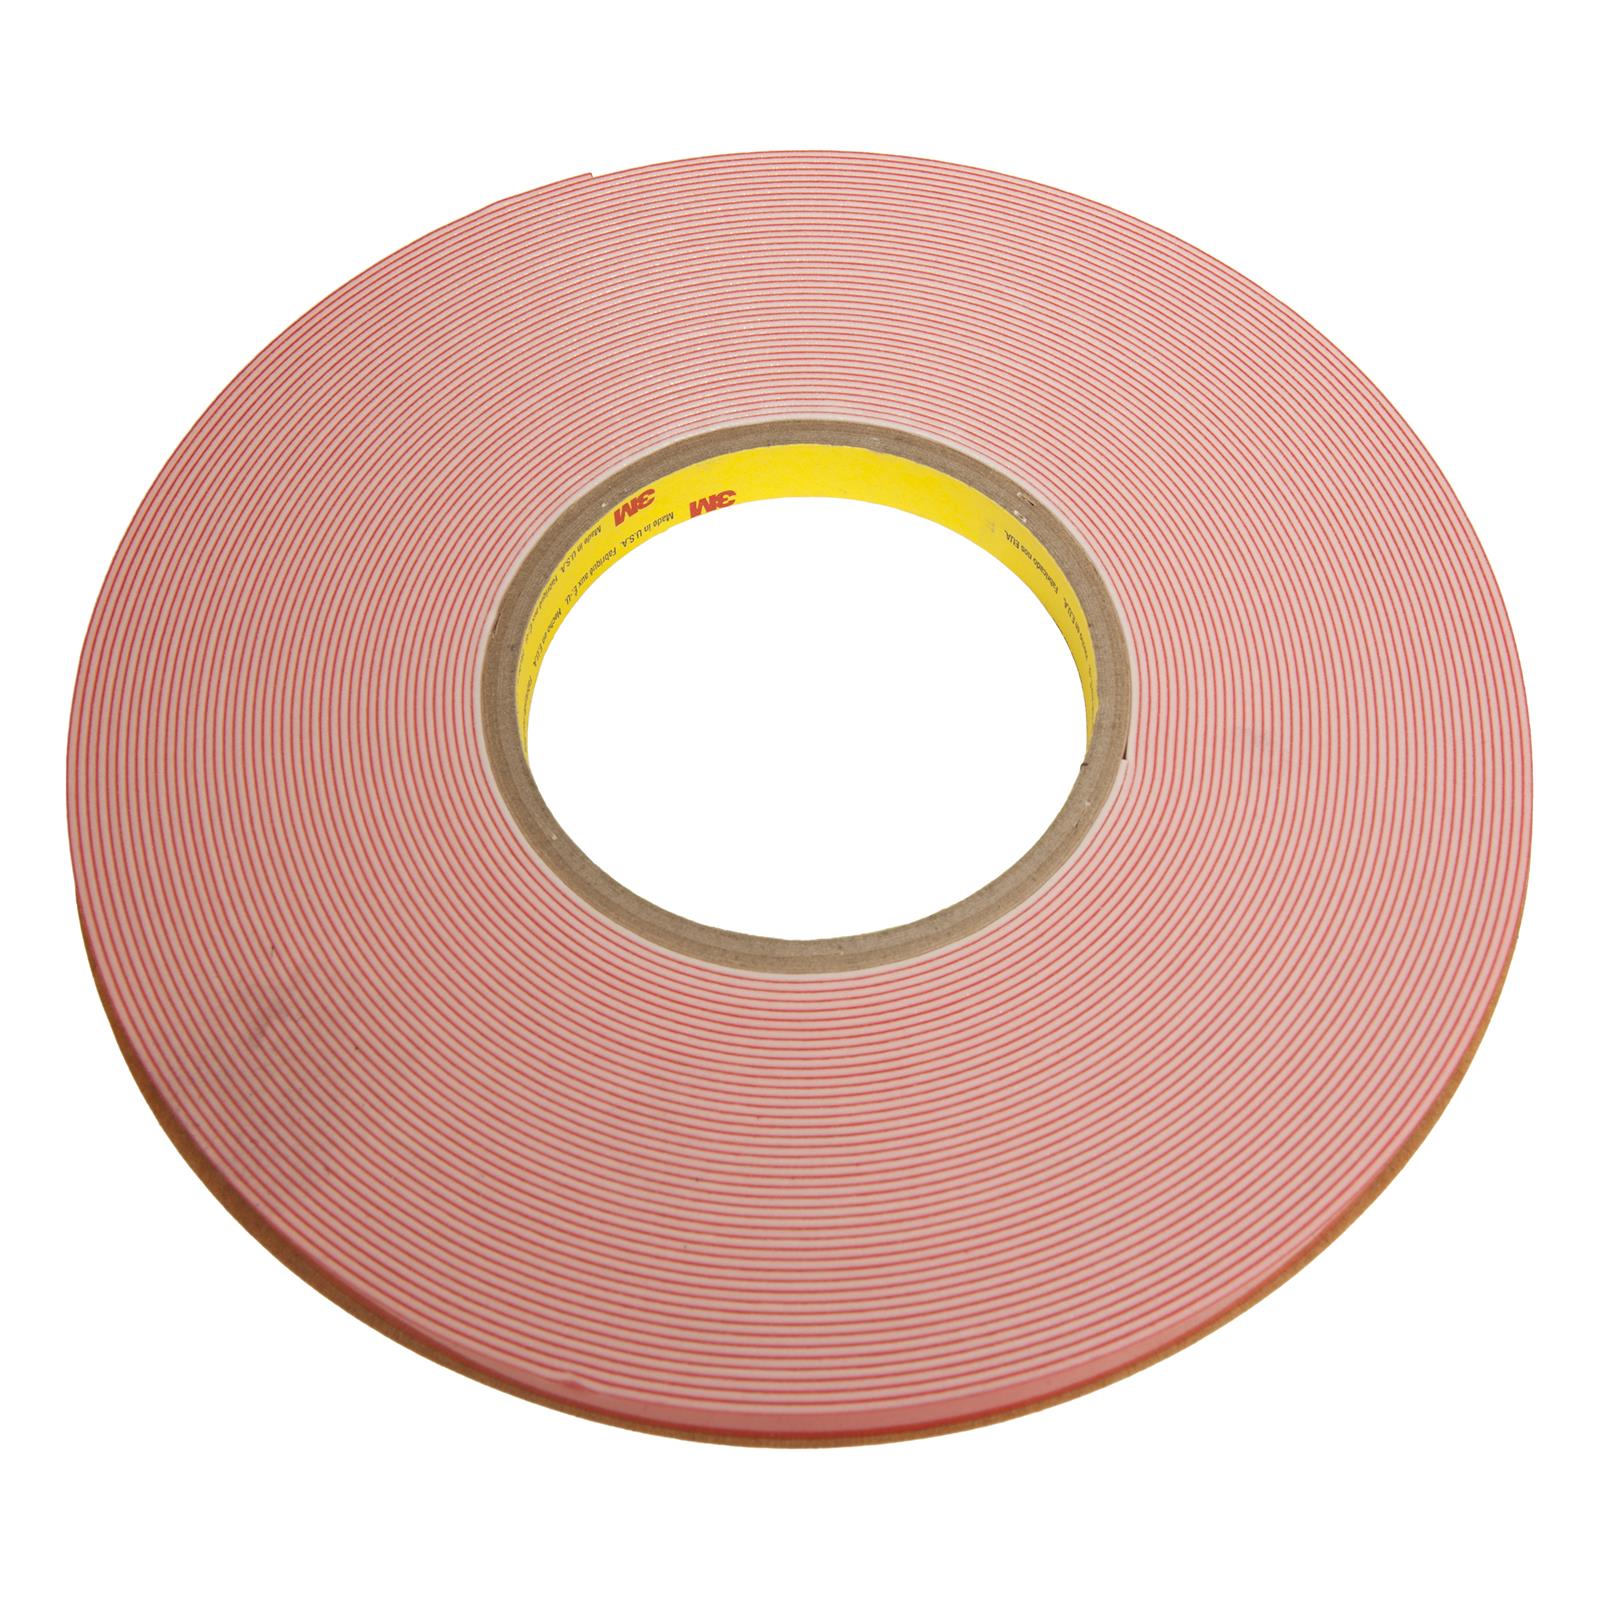 3m-6380-3m-products-automotive-attachment-tapes-summit-racing